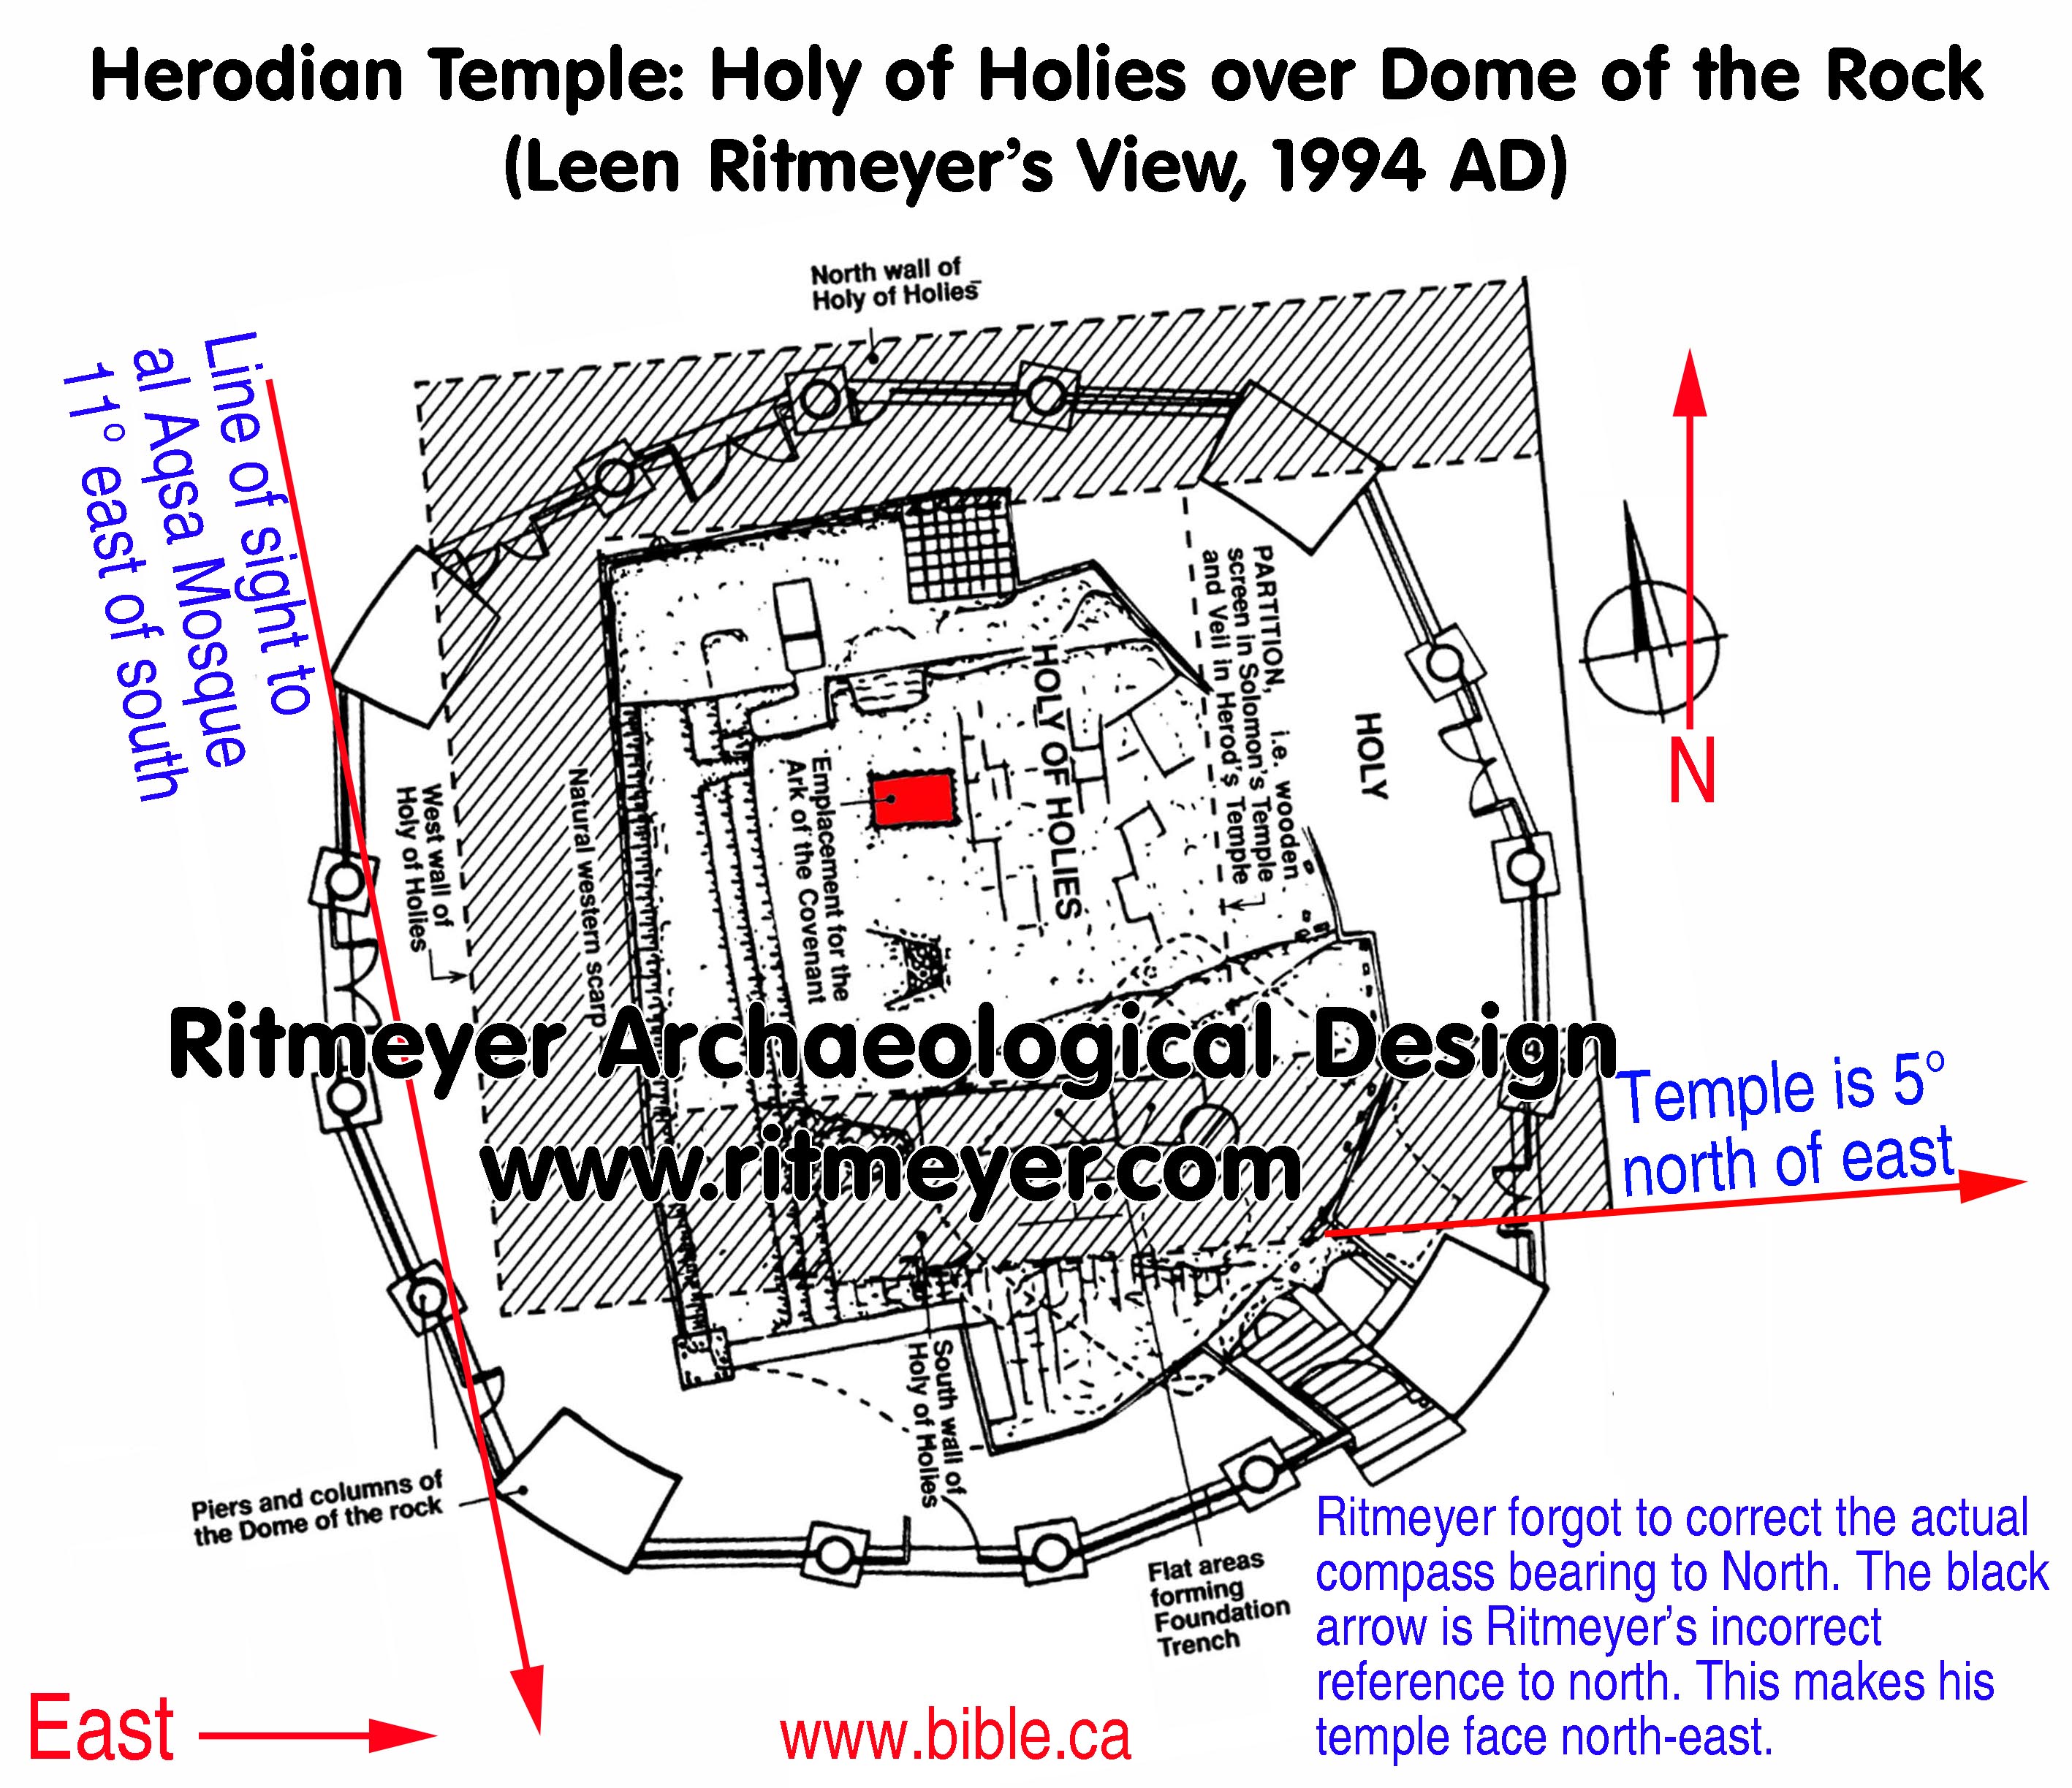 The Temple in Jerusalem was not located over the Dome of the Rock: